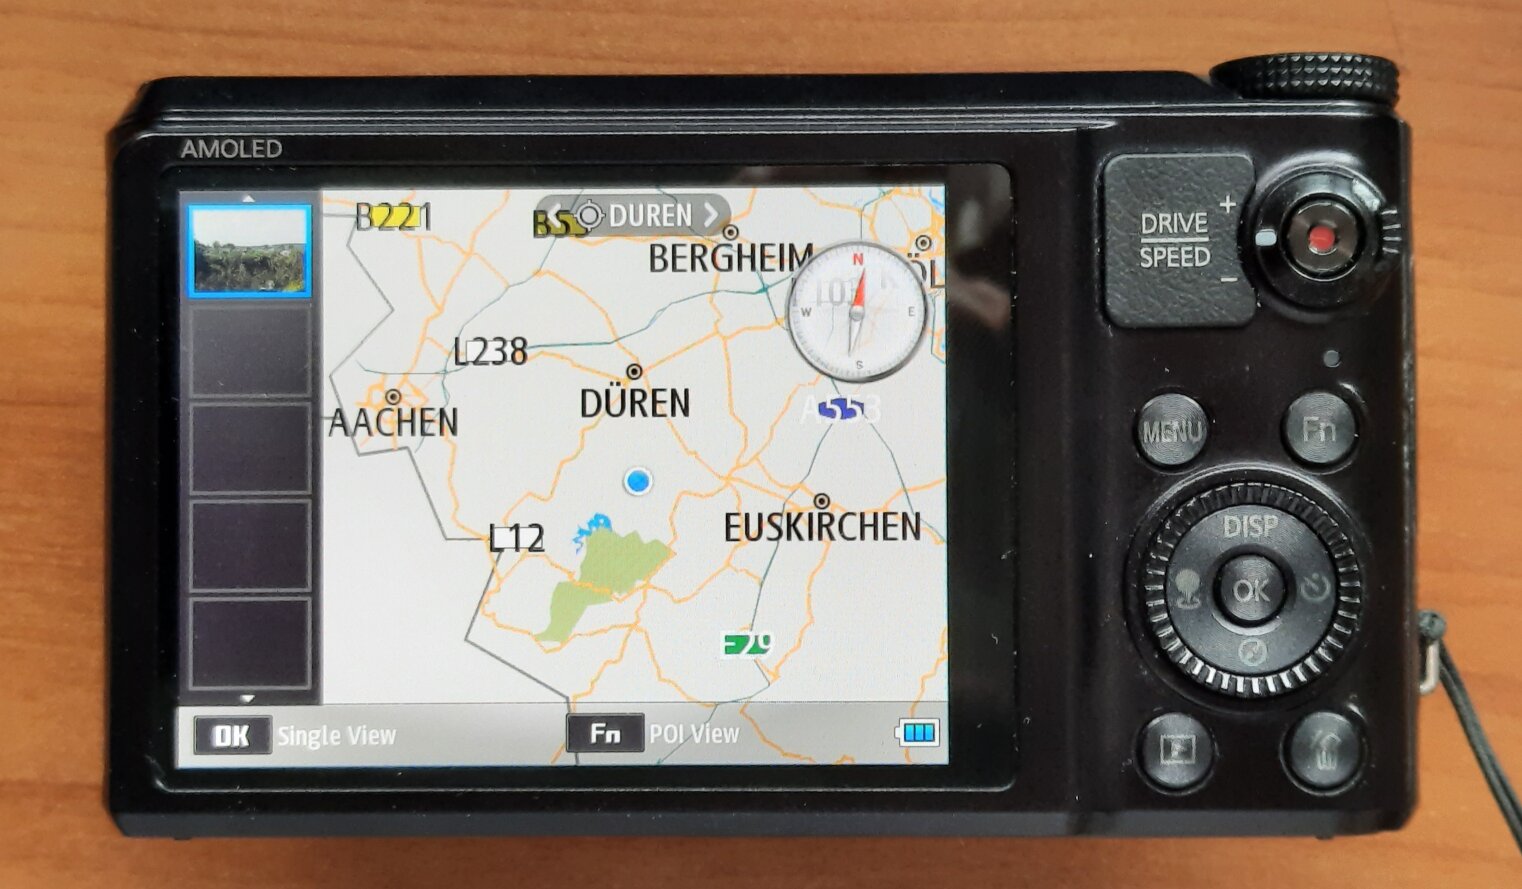 WB850F showing a map